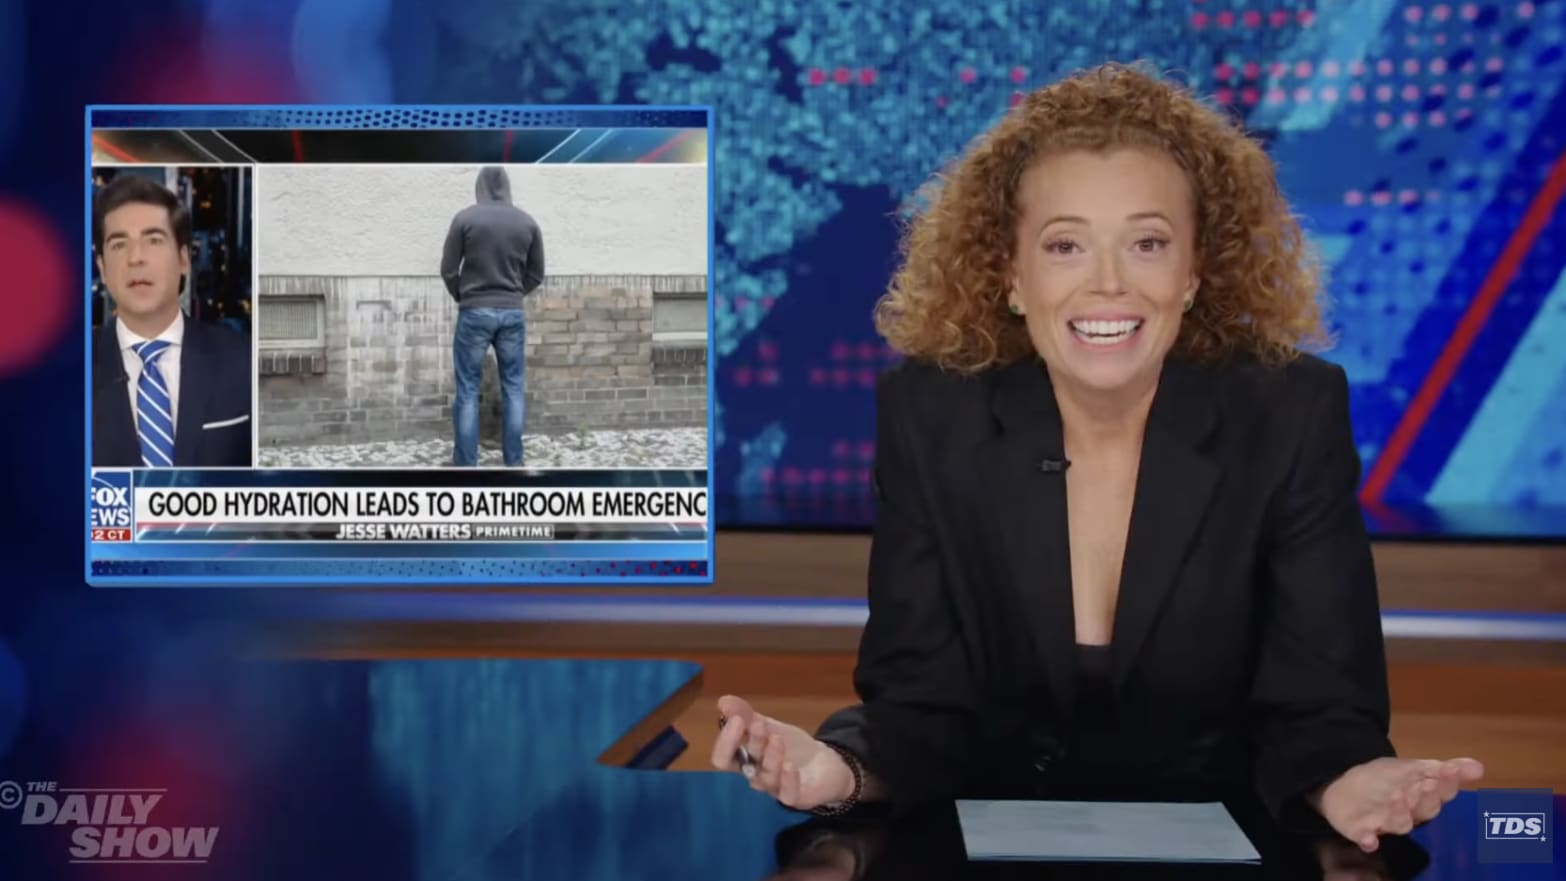 The Daily Show guest host Michelle Wolf